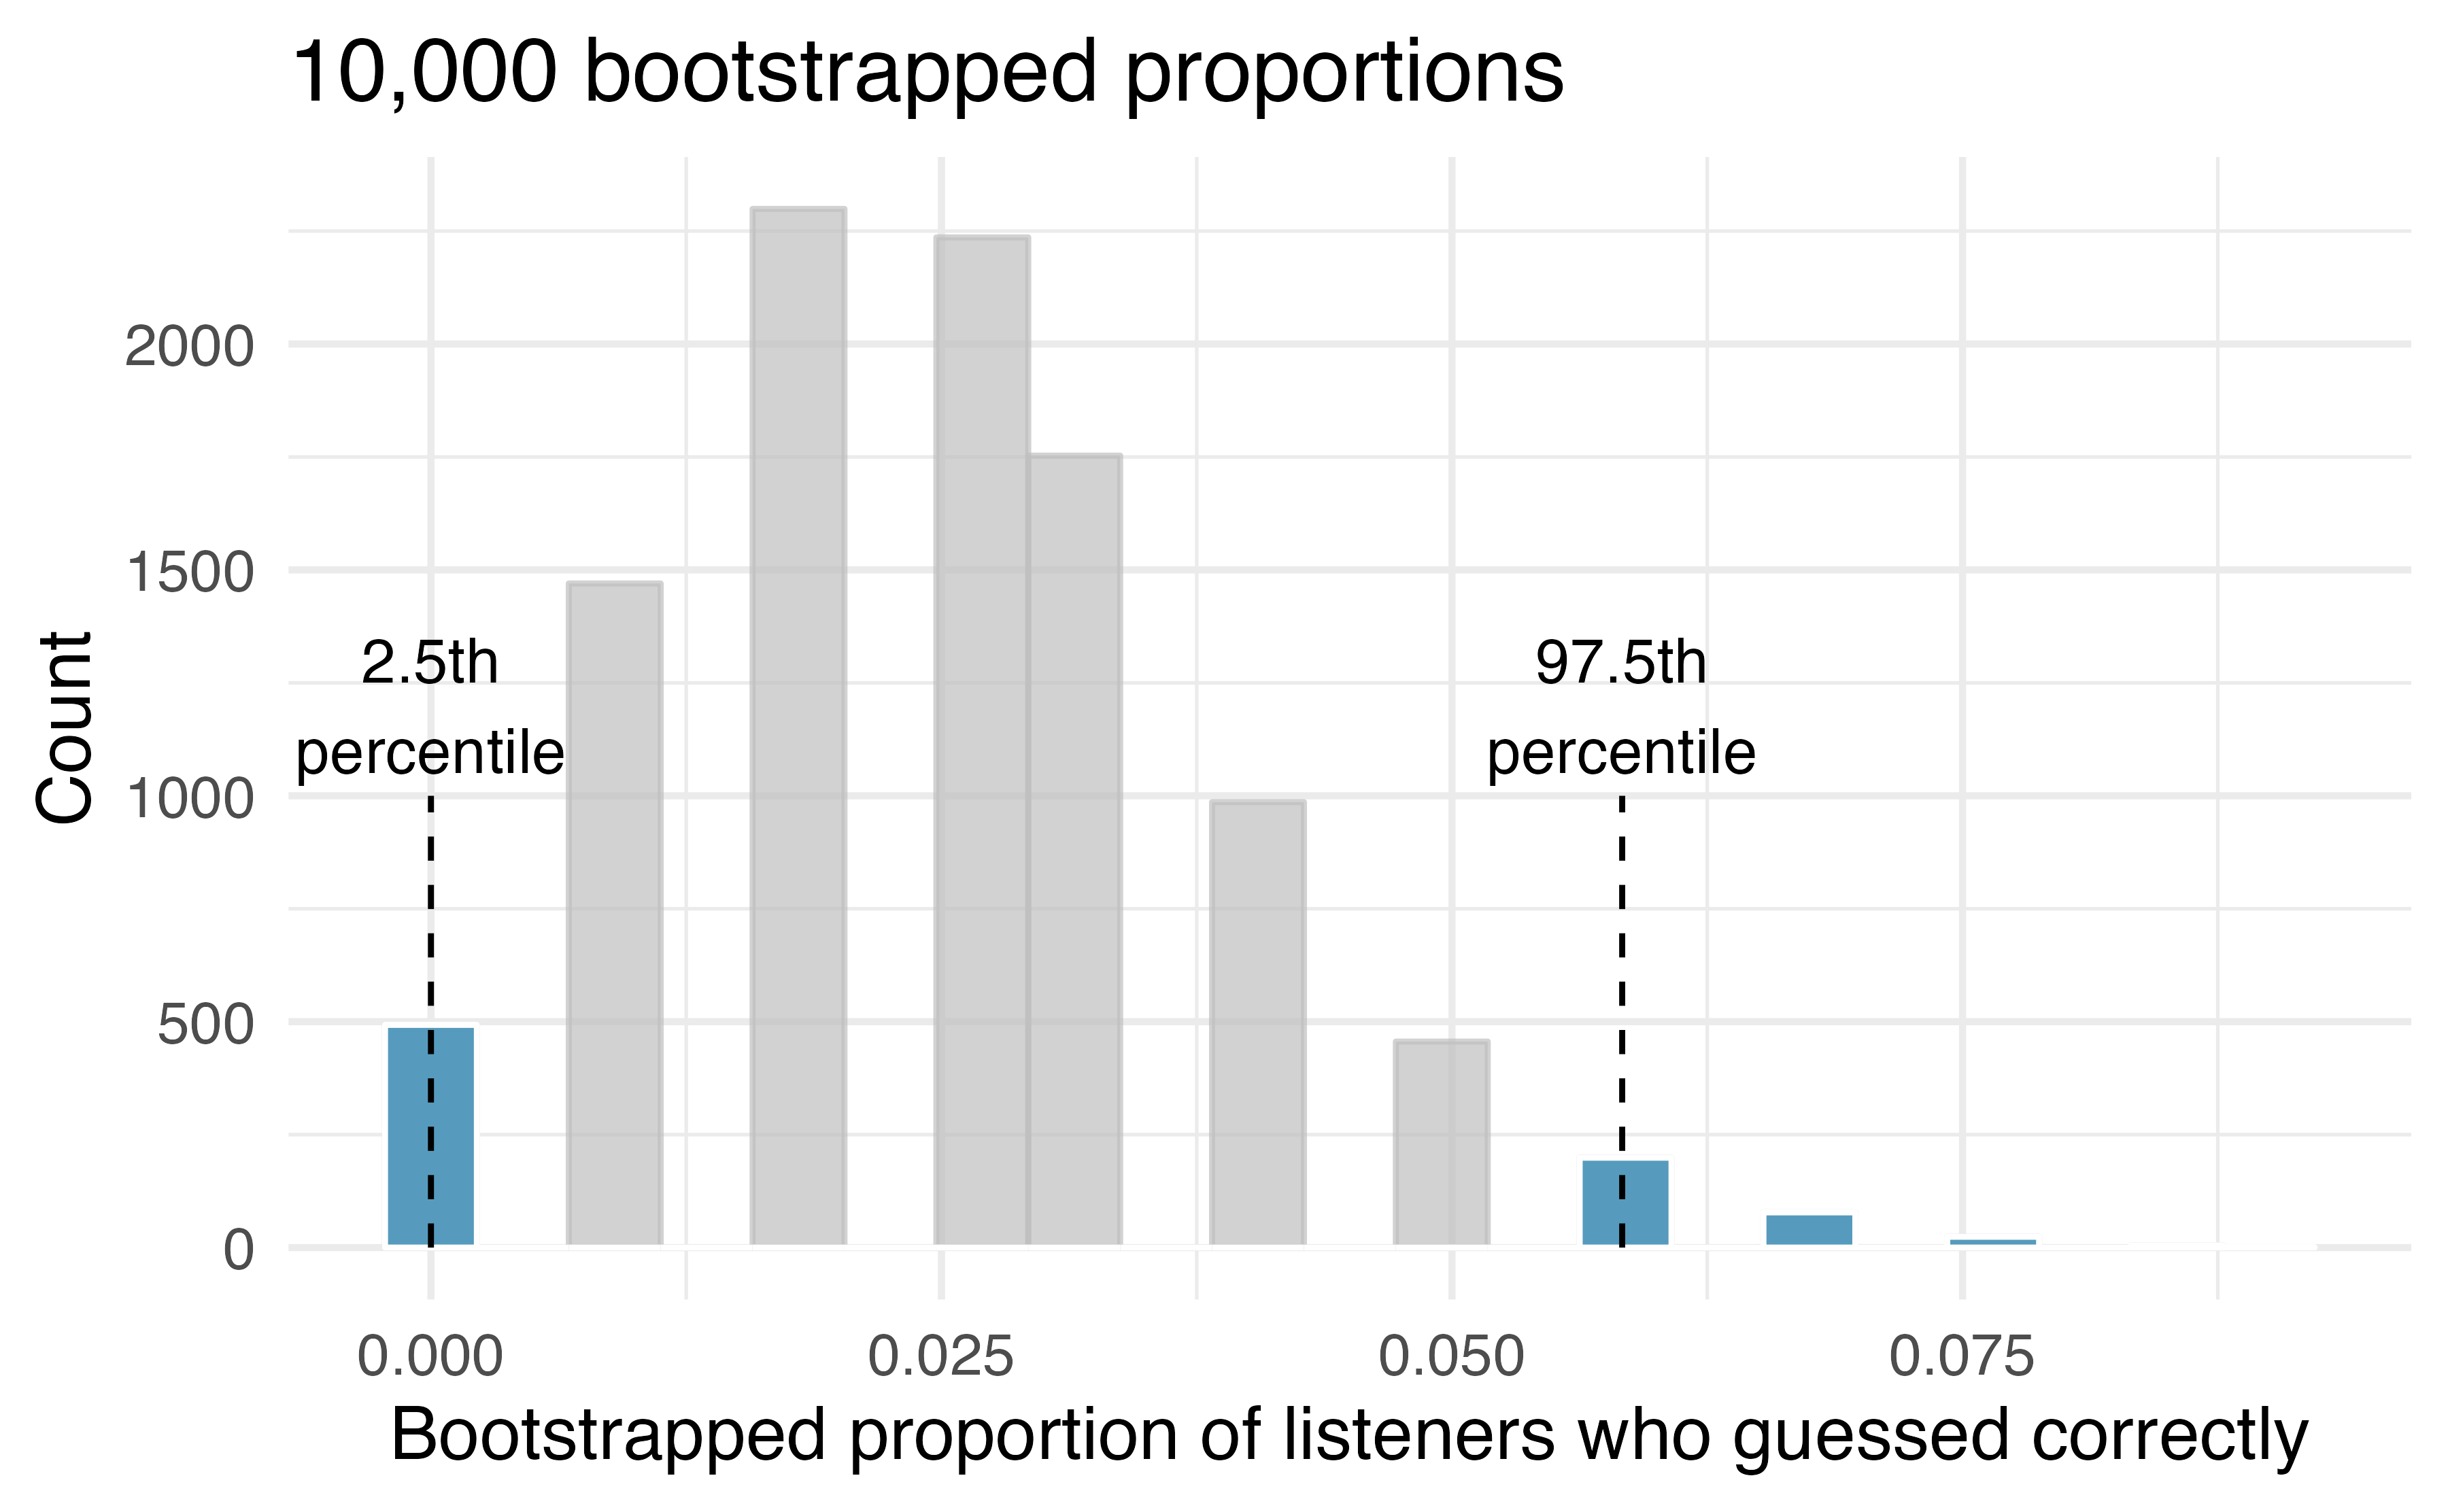 The original listener-tapper data is bootstrapped 10,000 times. Each simulation creates a sample where the probability of being correct is \(\hat{p} = 3/120.\) The 2.5 percentile proportion is 0 and the 97.5 percentile is 0.0583. The result is that we are confident that, in the population, the true percent of people who can guess correctly is between 0% and 5.83%.